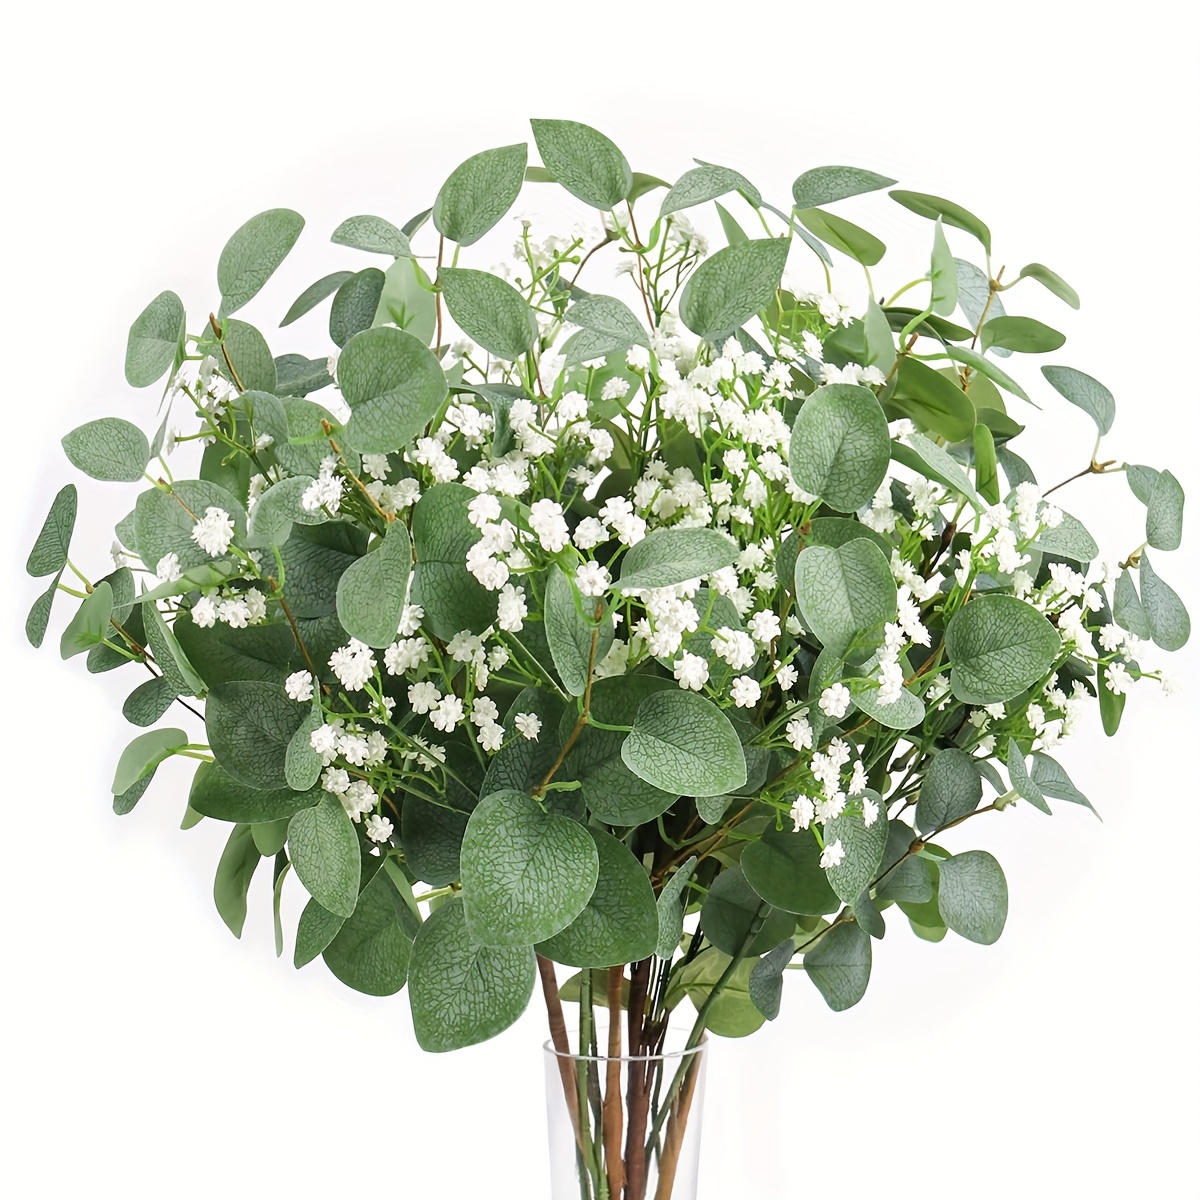 

4pcs, Eucalyptus Stems And Baby's Breath Artificial Flowers Artificial Green Bouquet For Wedding Table Centerpieces Home Decor